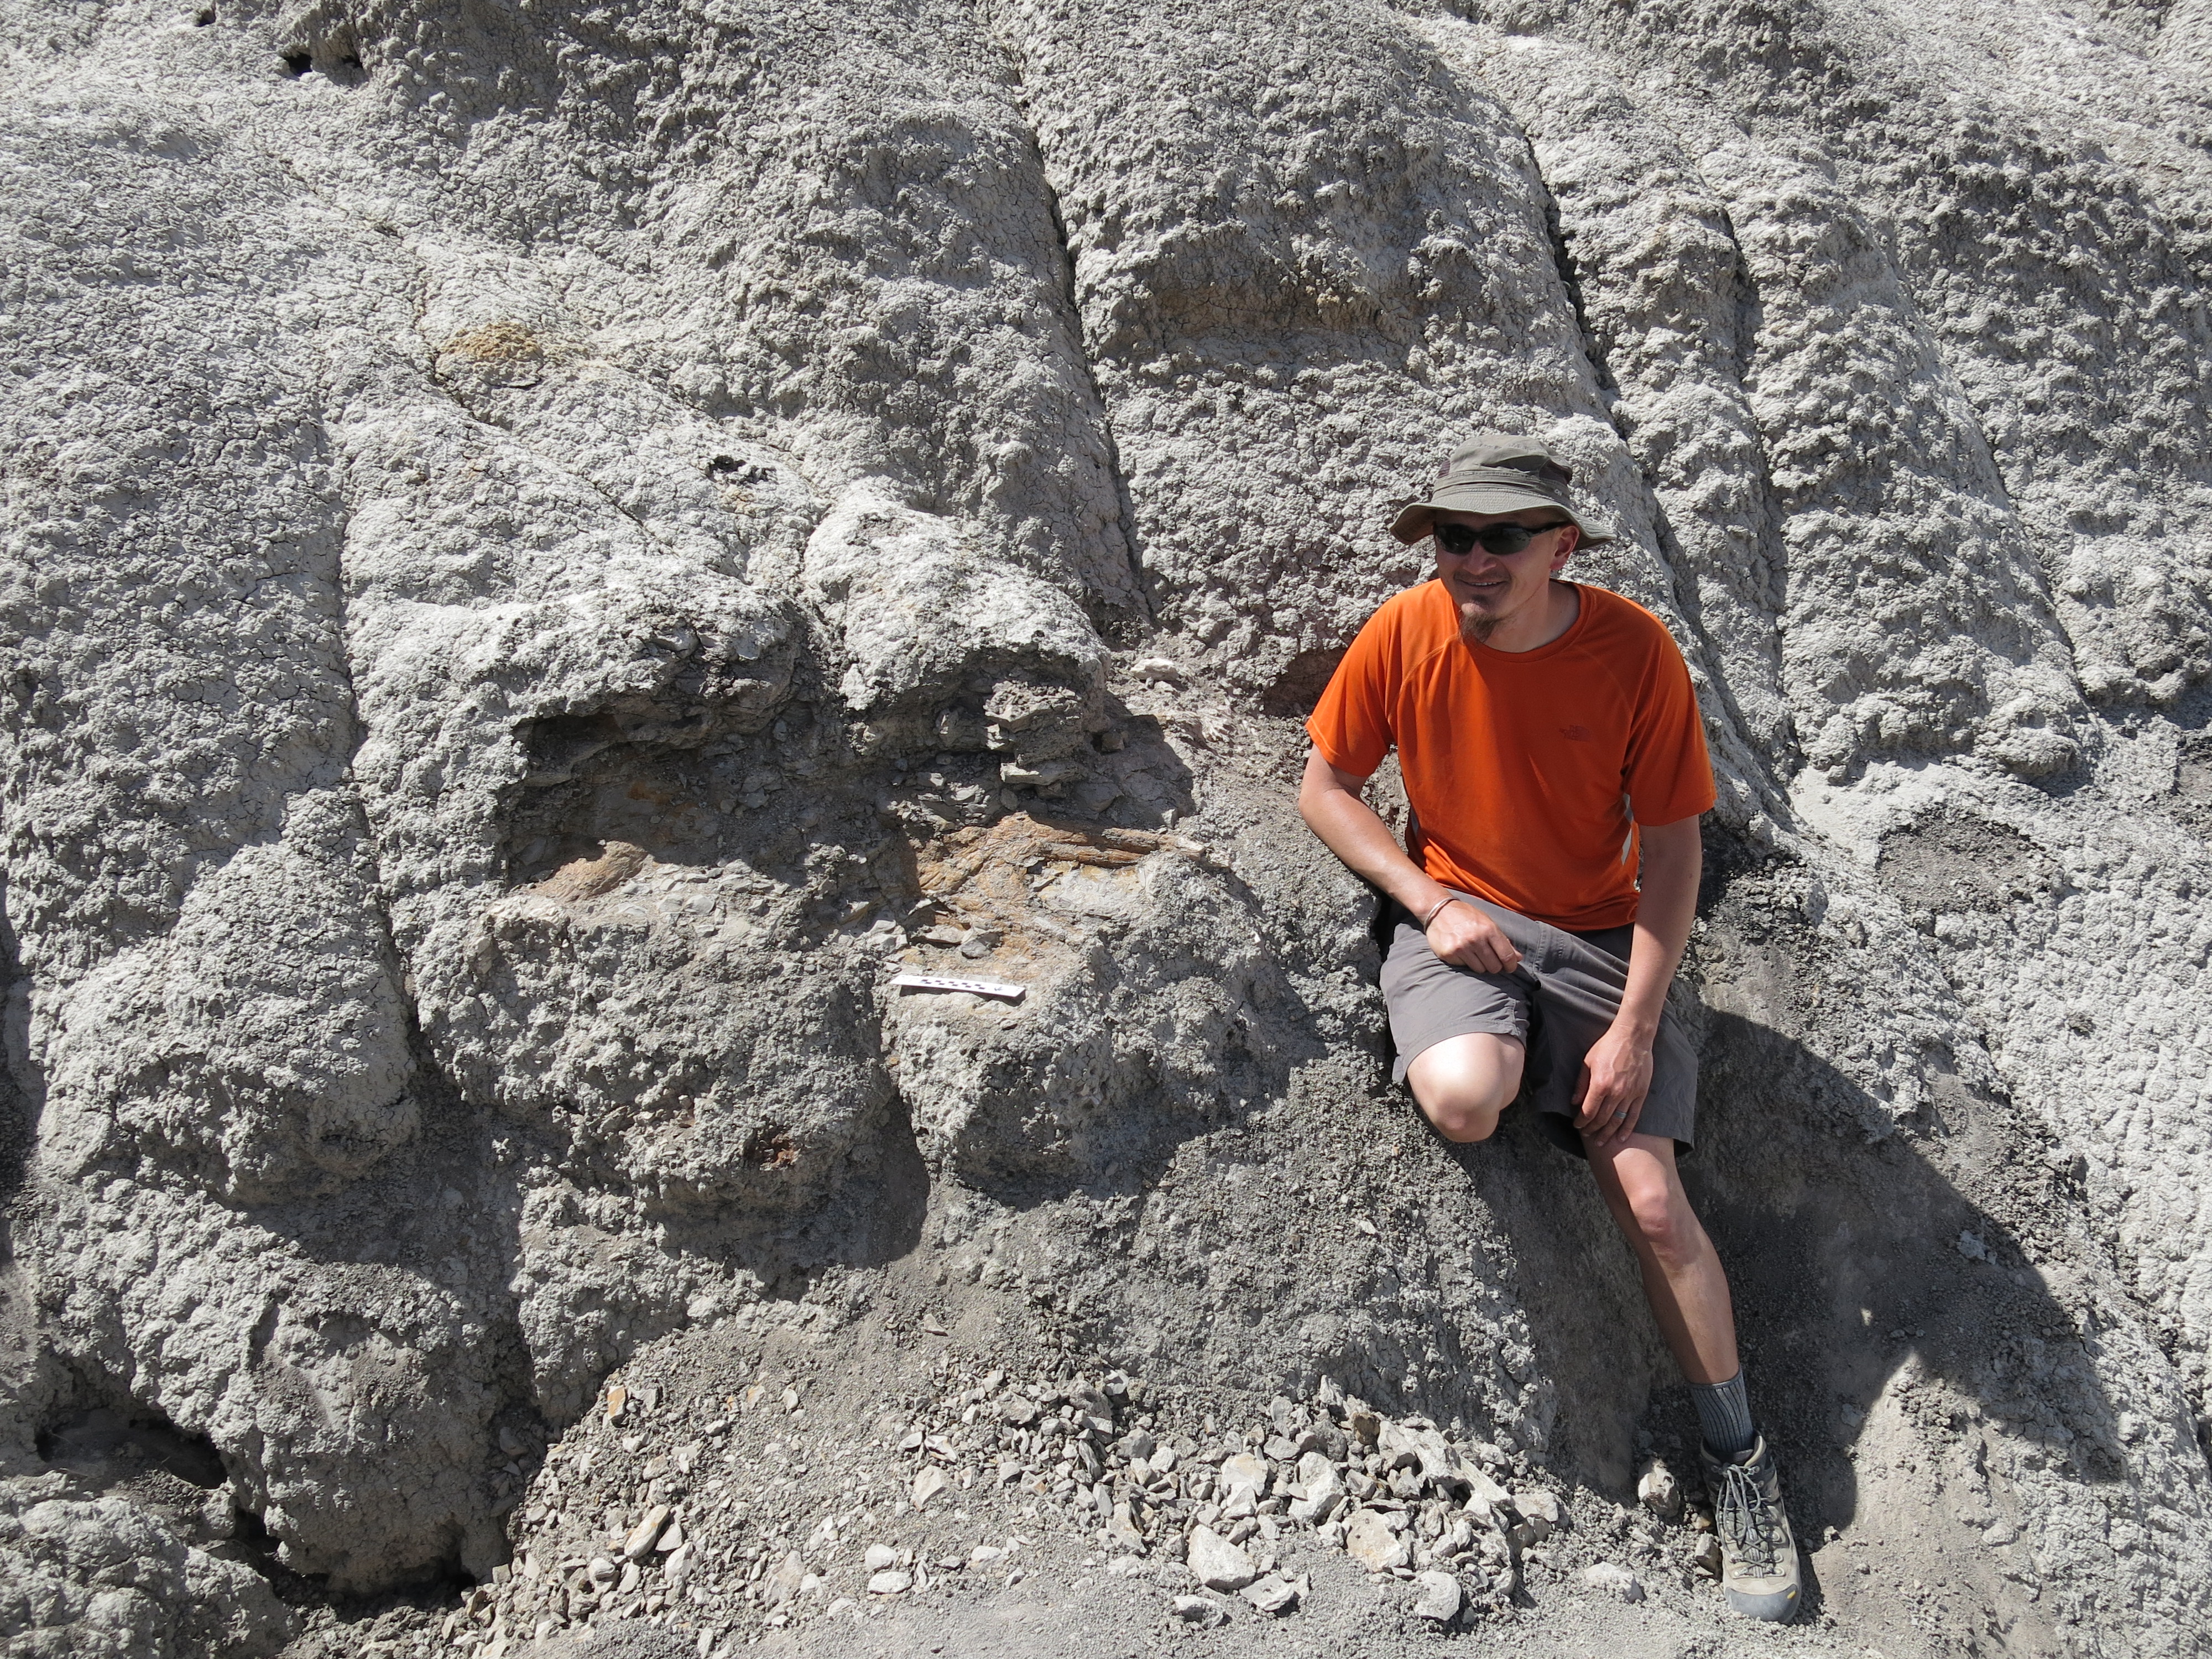 Sitting next to the freshly uncovered skull of Pentaceratops that I discovered in the Cretaceous of New Mexico.